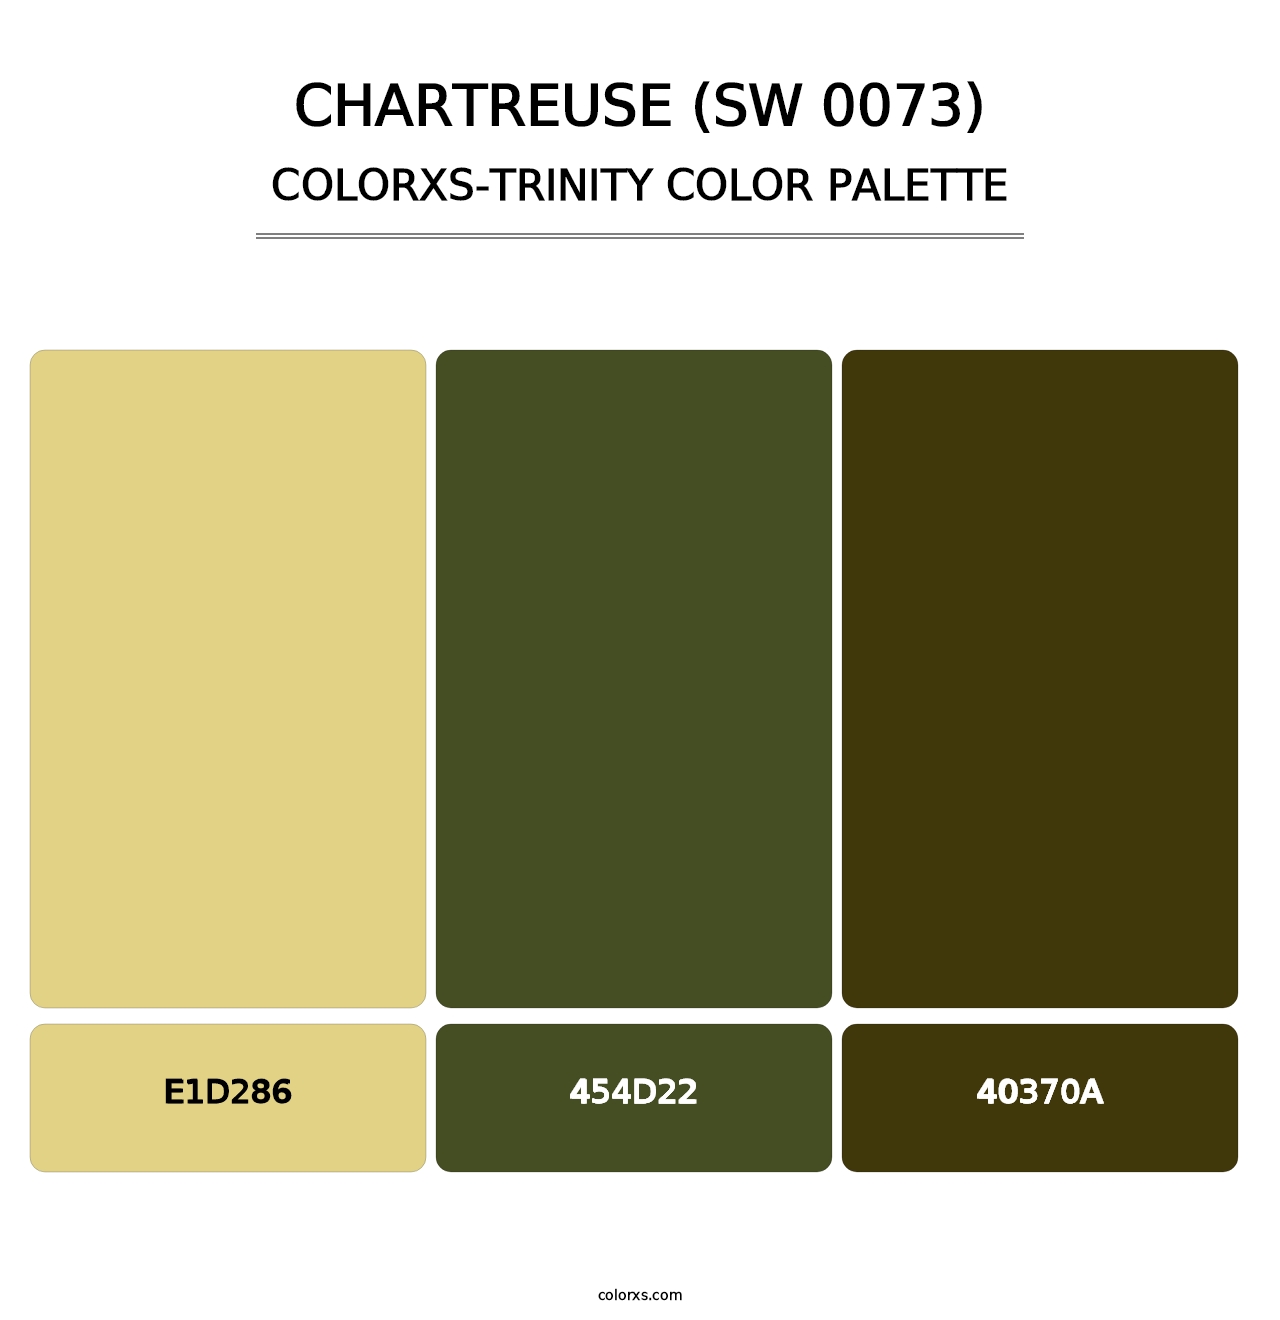 Chartreuse (SW 0073) - Colorxs Trinity Palette